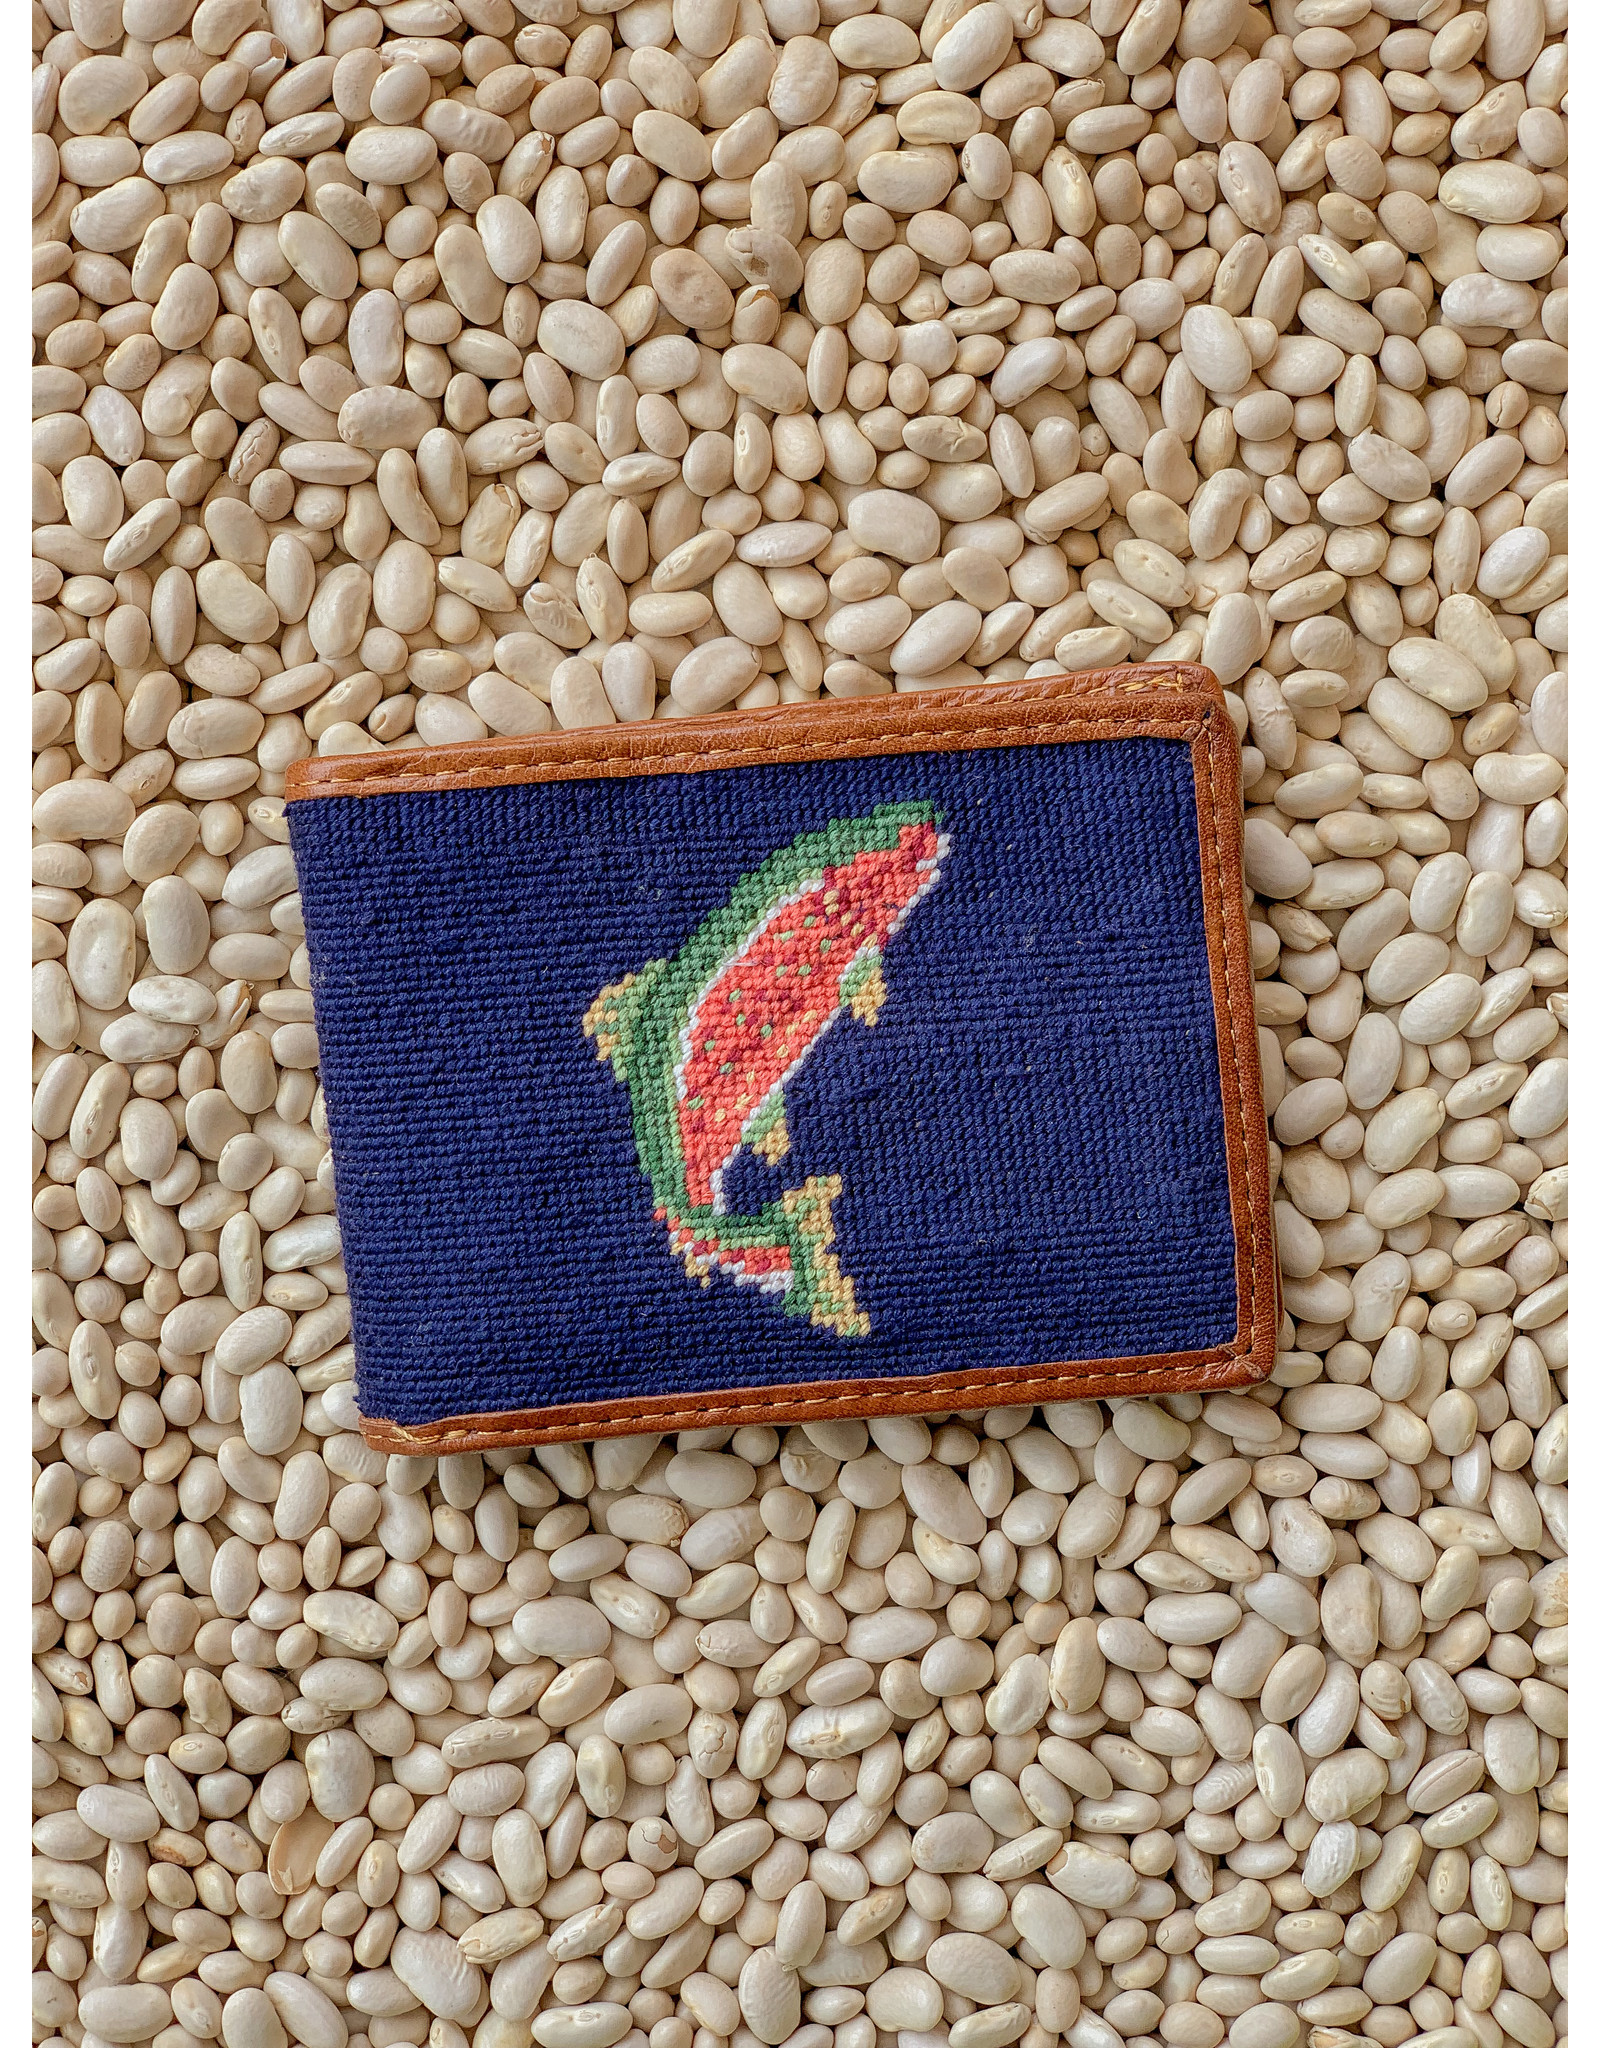 Smathers & Branson S&B Needlepoint Bi-fold Wallet, Trout and Fly, Navy